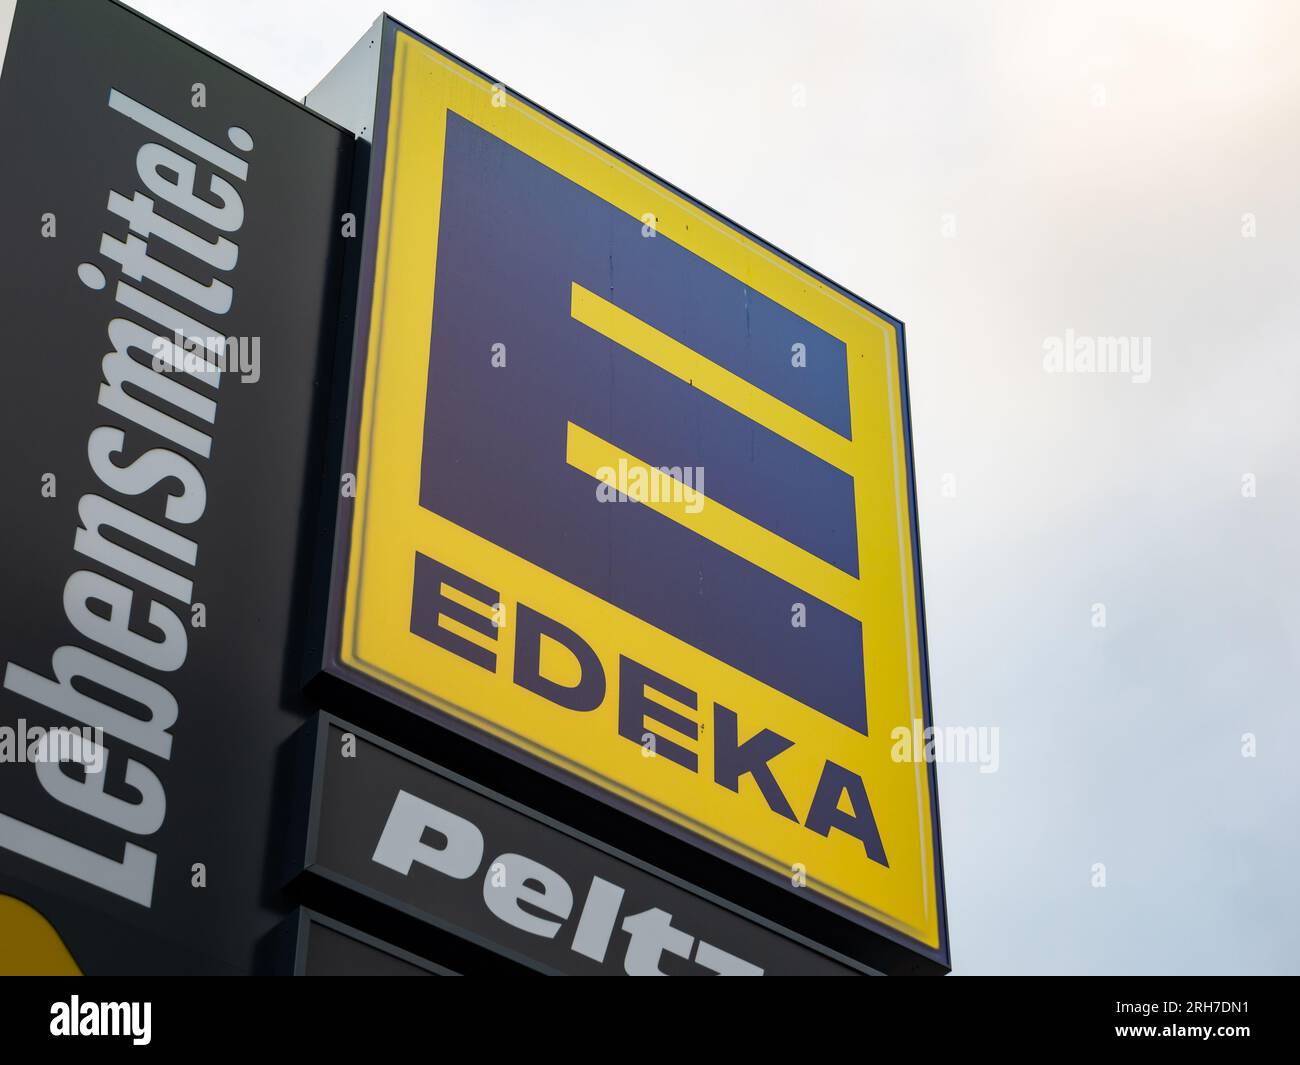 Edeka grocery store logo sign as advertisement in front of the sky. Supermarket signage for the German retailer. Big blue E letter on yellow. Stock Photo